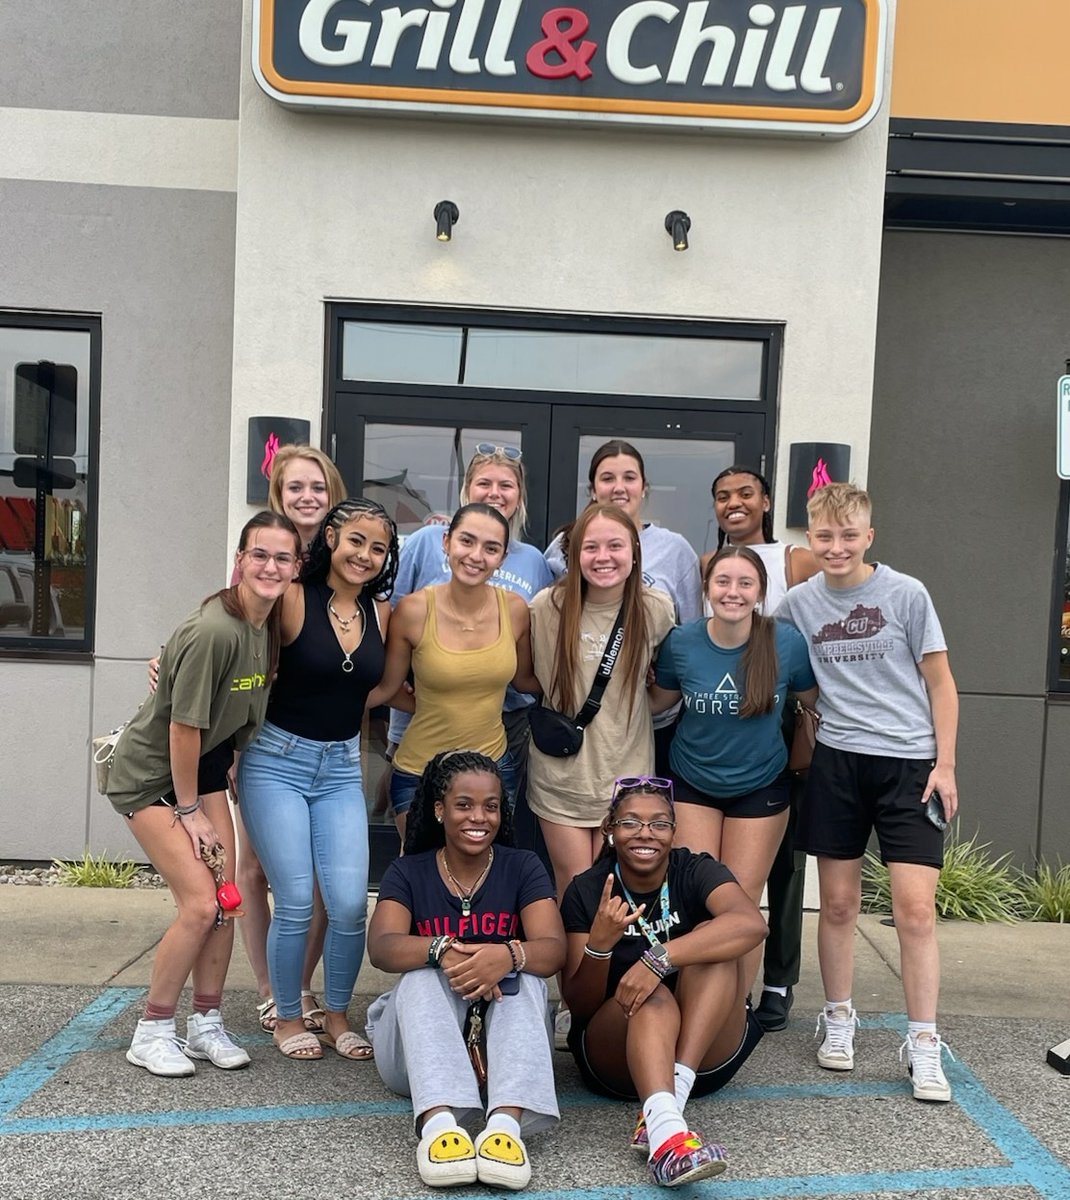 Some of the crew getting together for a DQ treat. Celebrating Timaya's Bday and spending some time together before the semester begins. Almost time to get back to work! Be a Tiger!